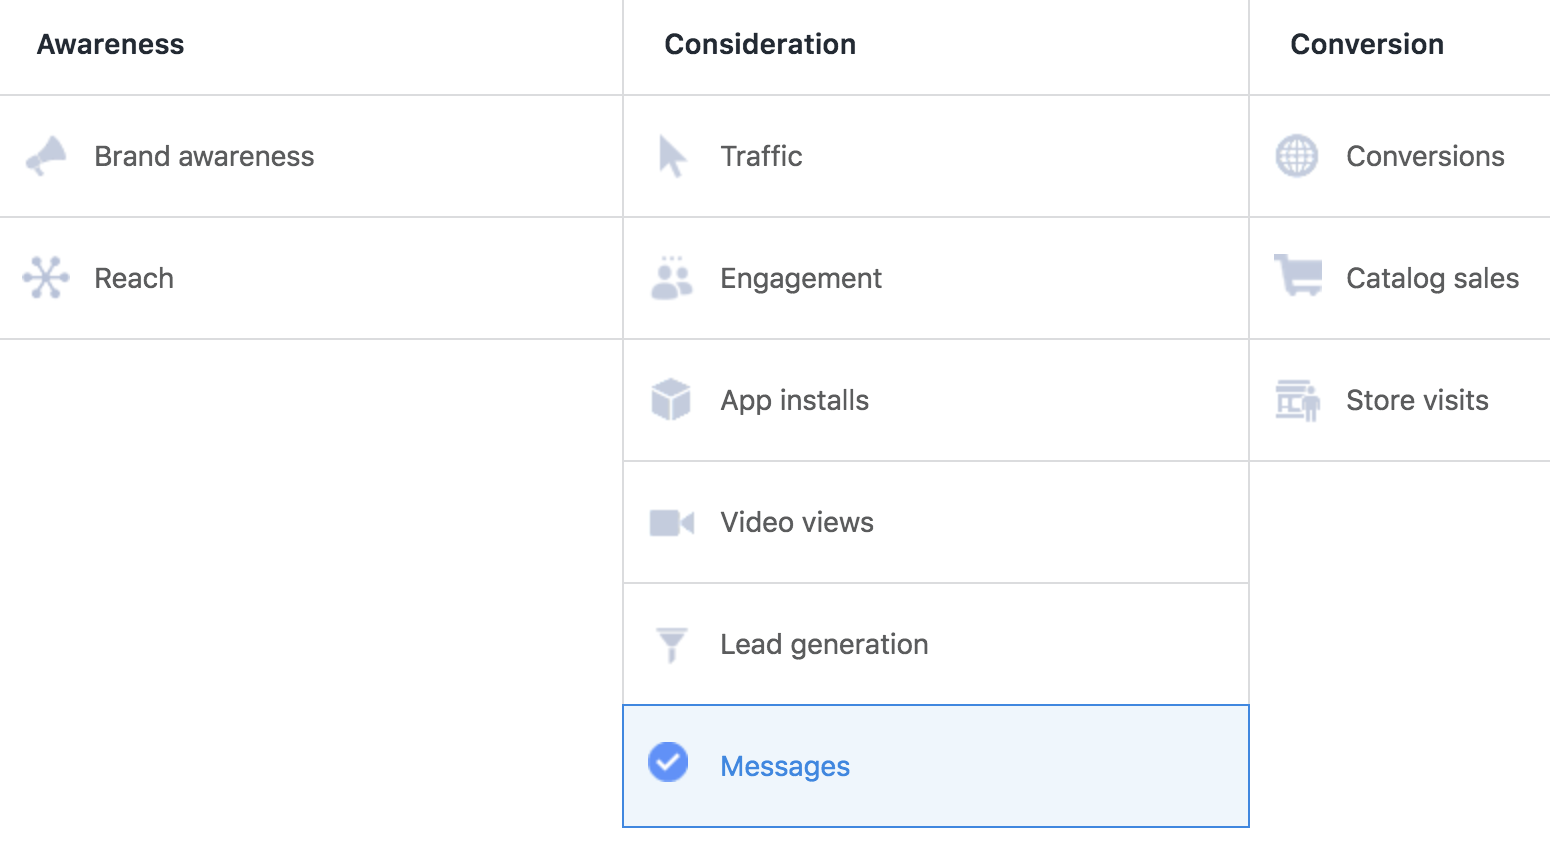 Choosing a marketing objective in Facebook's ads manager